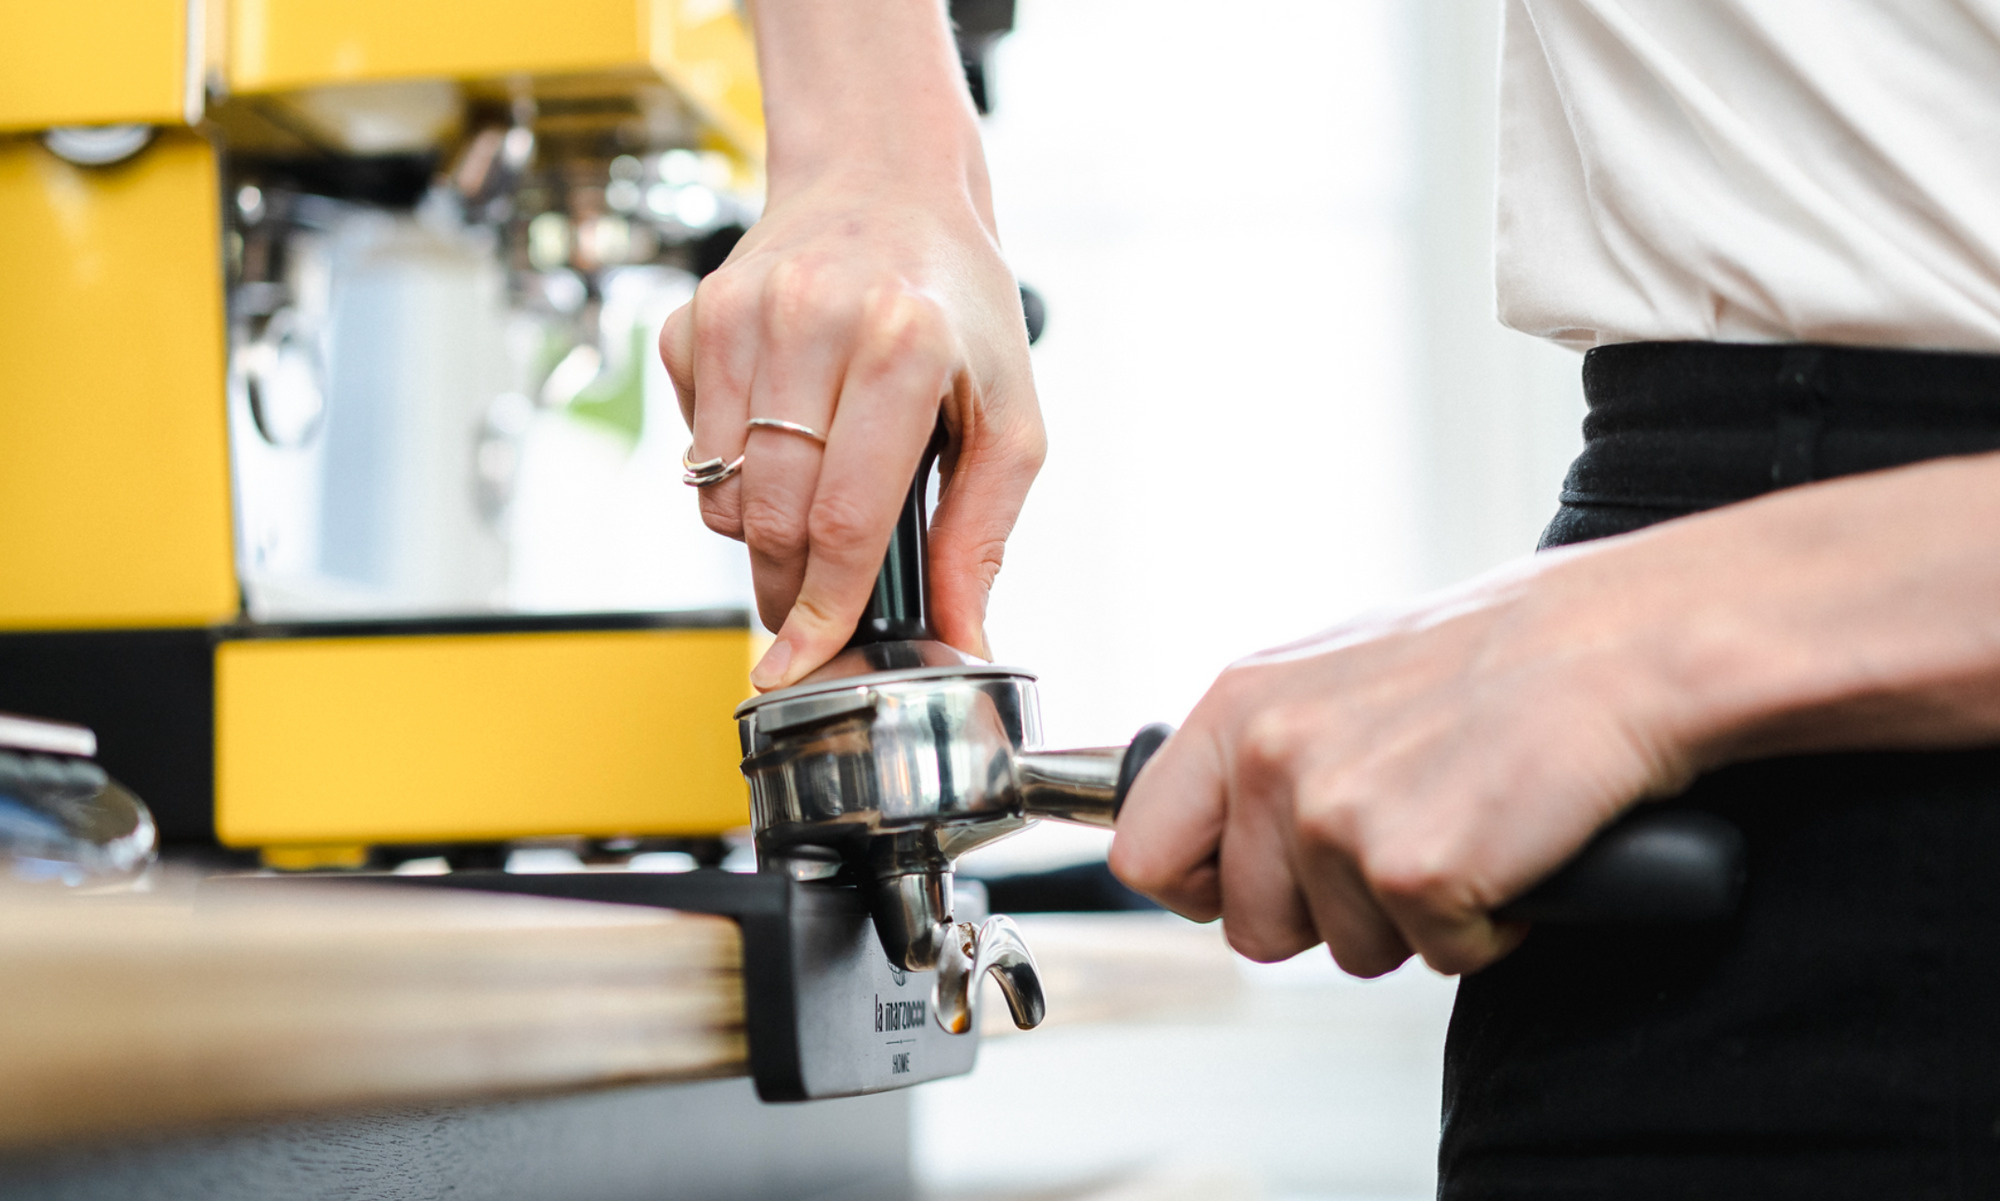 The Ultimate Guide to Barista Tools for Home Brewing